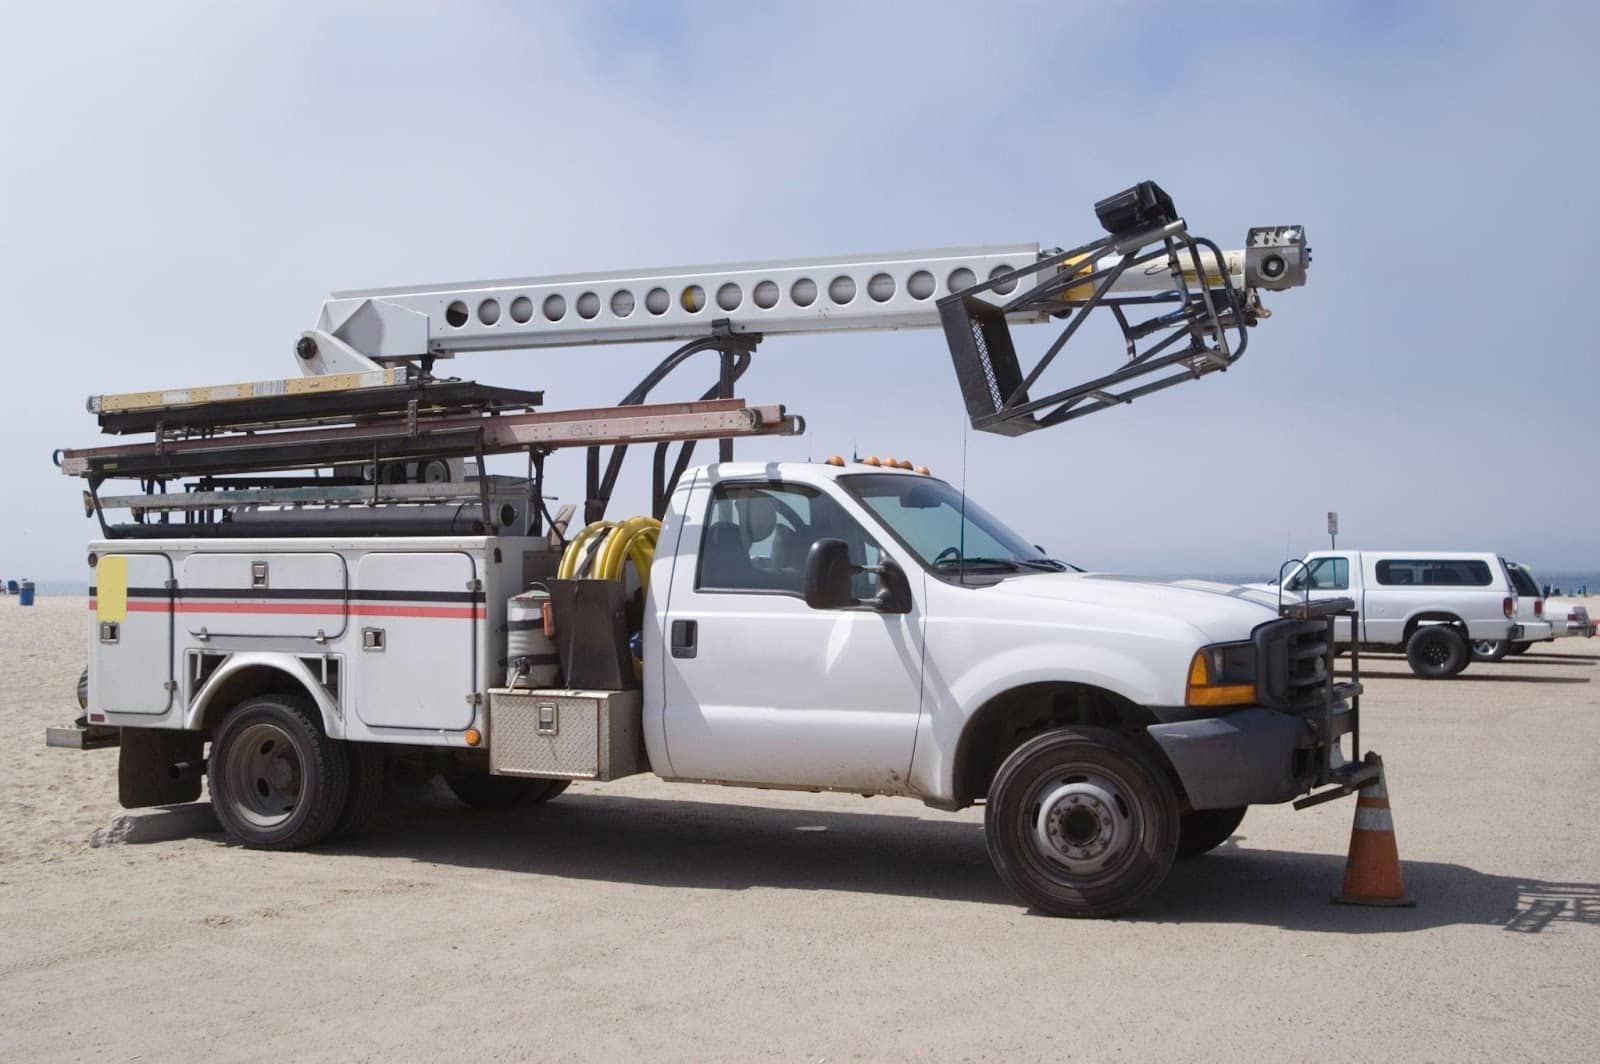 A Boom Truck Inspection Checklist For Service Teams by 1stReporting.com.